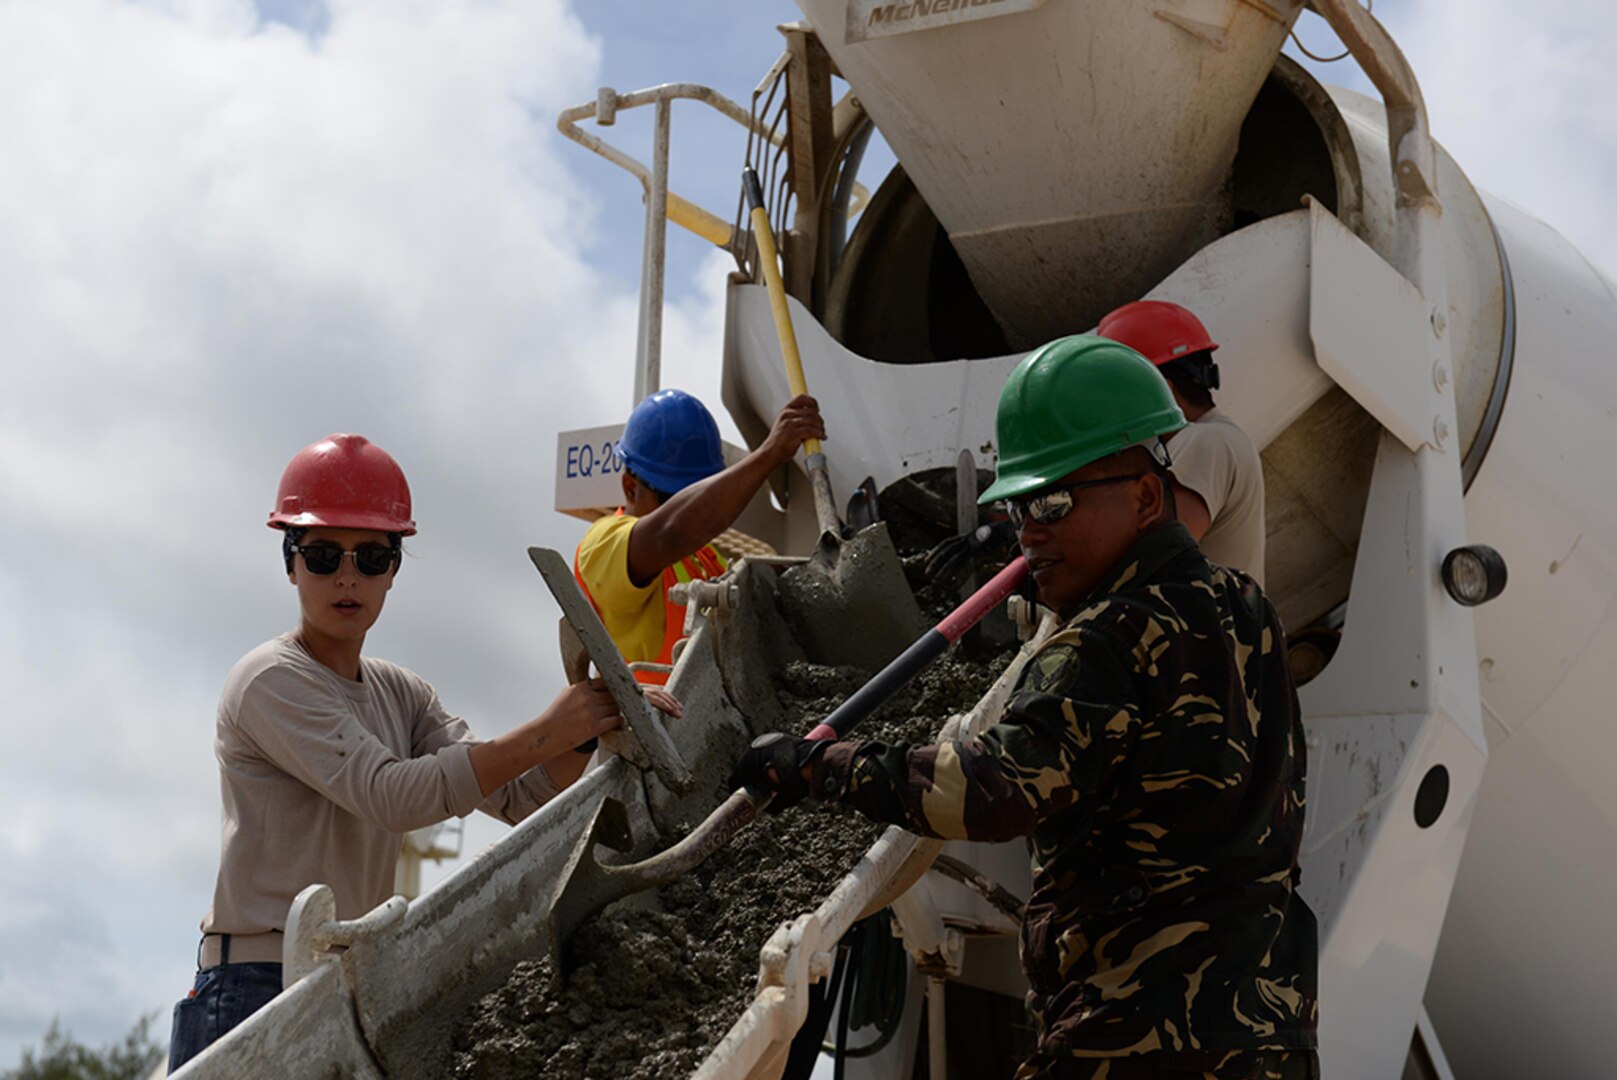 ANDERSEN AIR FORCE BASE, Guam (May 18, 2016) - U.S. and Philippine Airmen push concrete from a cement truck during a Pacific Unity tilt-up workshop May 18, 2016, at Andersen Air Force Base, Guam. Pacific Unity events are designed to build partnerships and promote interoperability through the equitable exchange of civil engineer related information. 